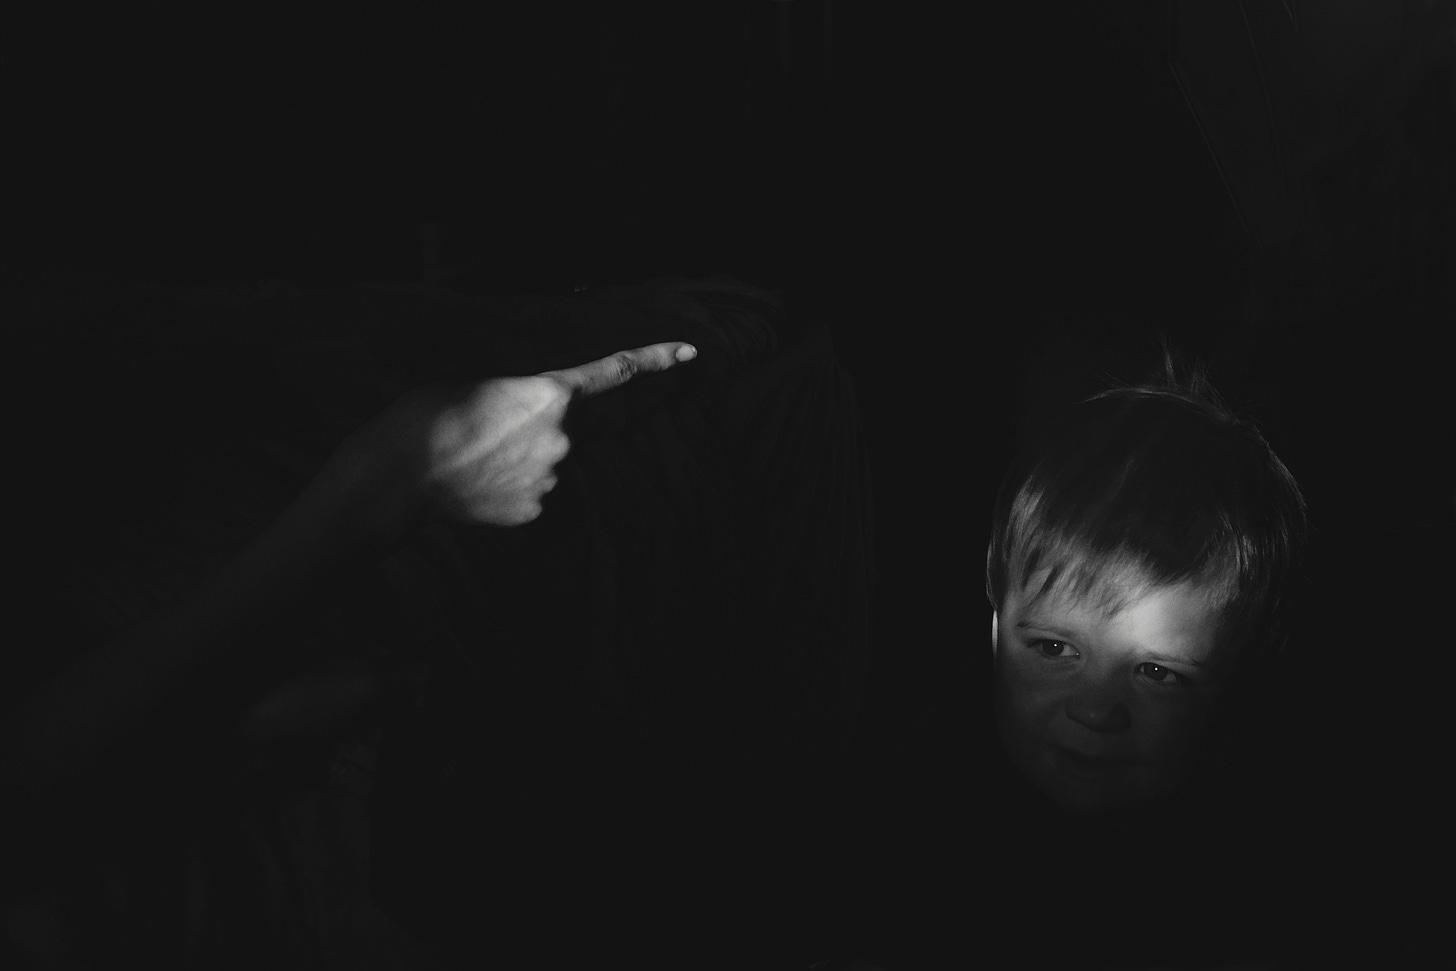 Black and white photo. On the left, the pointed finger of an adult is aimed toward a small, cowering, blonde child with fearful eyes.